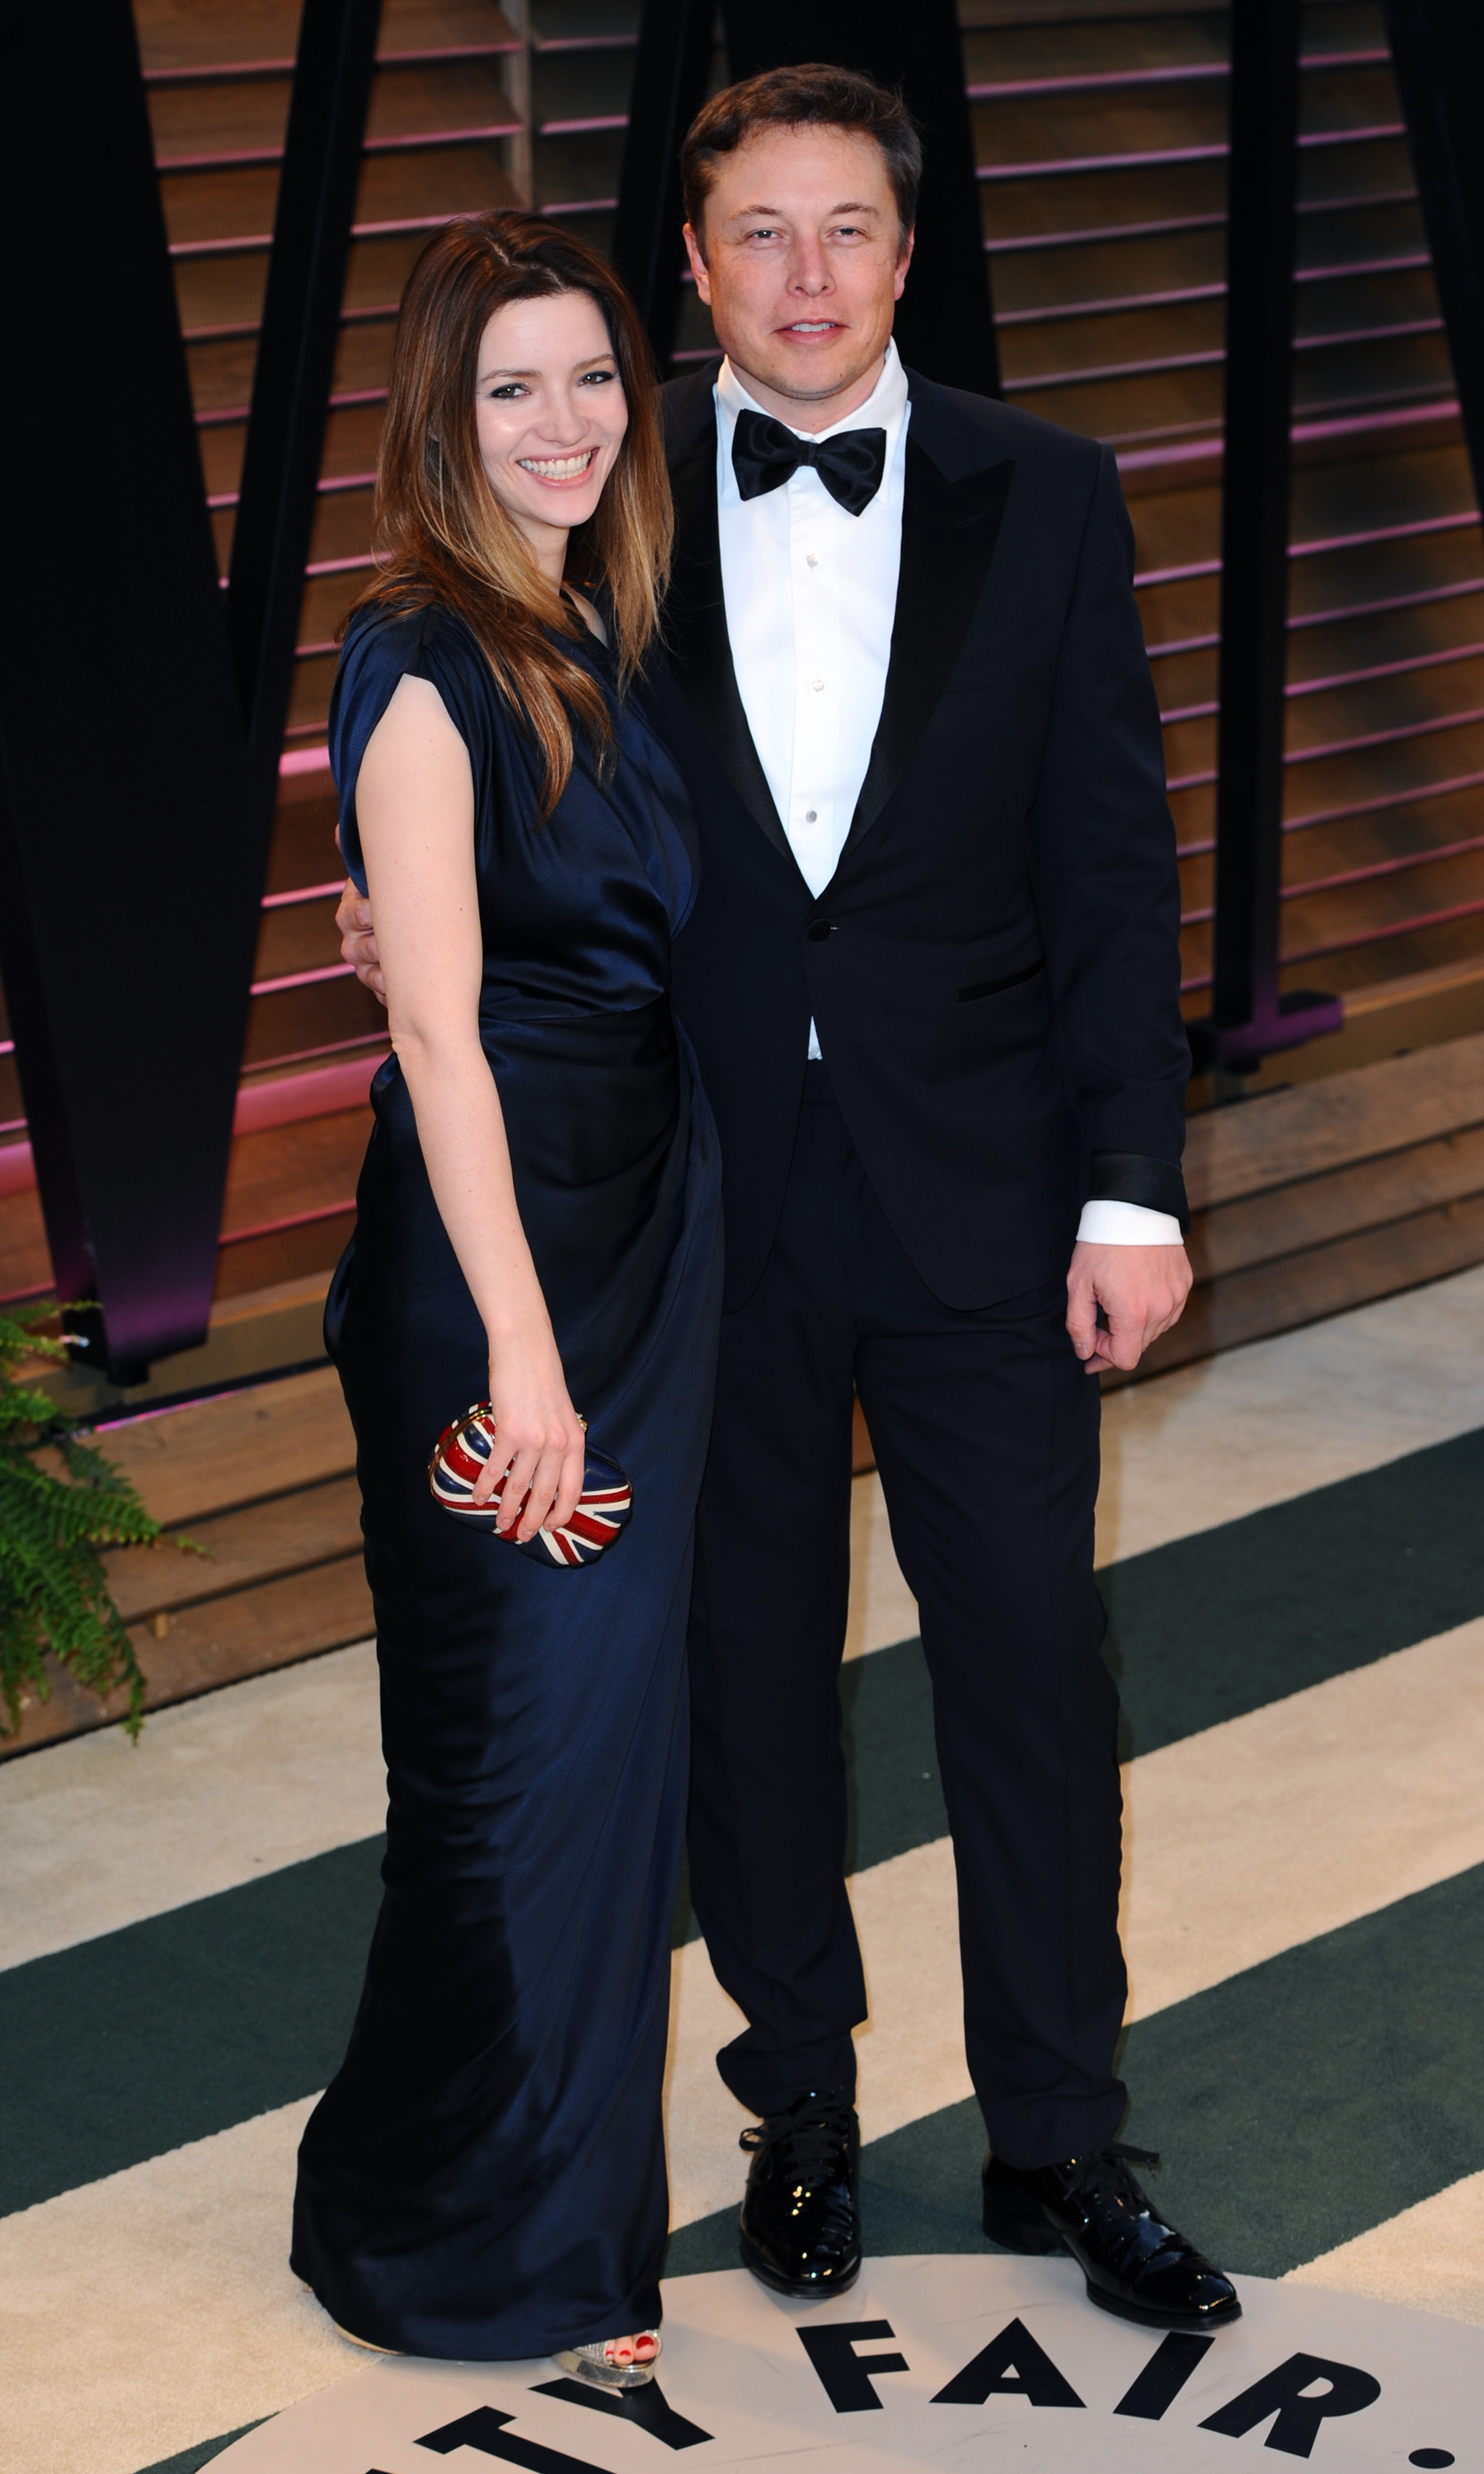 Talulah Riley (L) and CEO of Tesla Motors Elon Musk attend the 2014 Vanity Fair Oscar Party hosted by Graydon Carter on March 2, 2014 in West Hollywood, California. (Anthony Harvey&mdash;Getty Images)